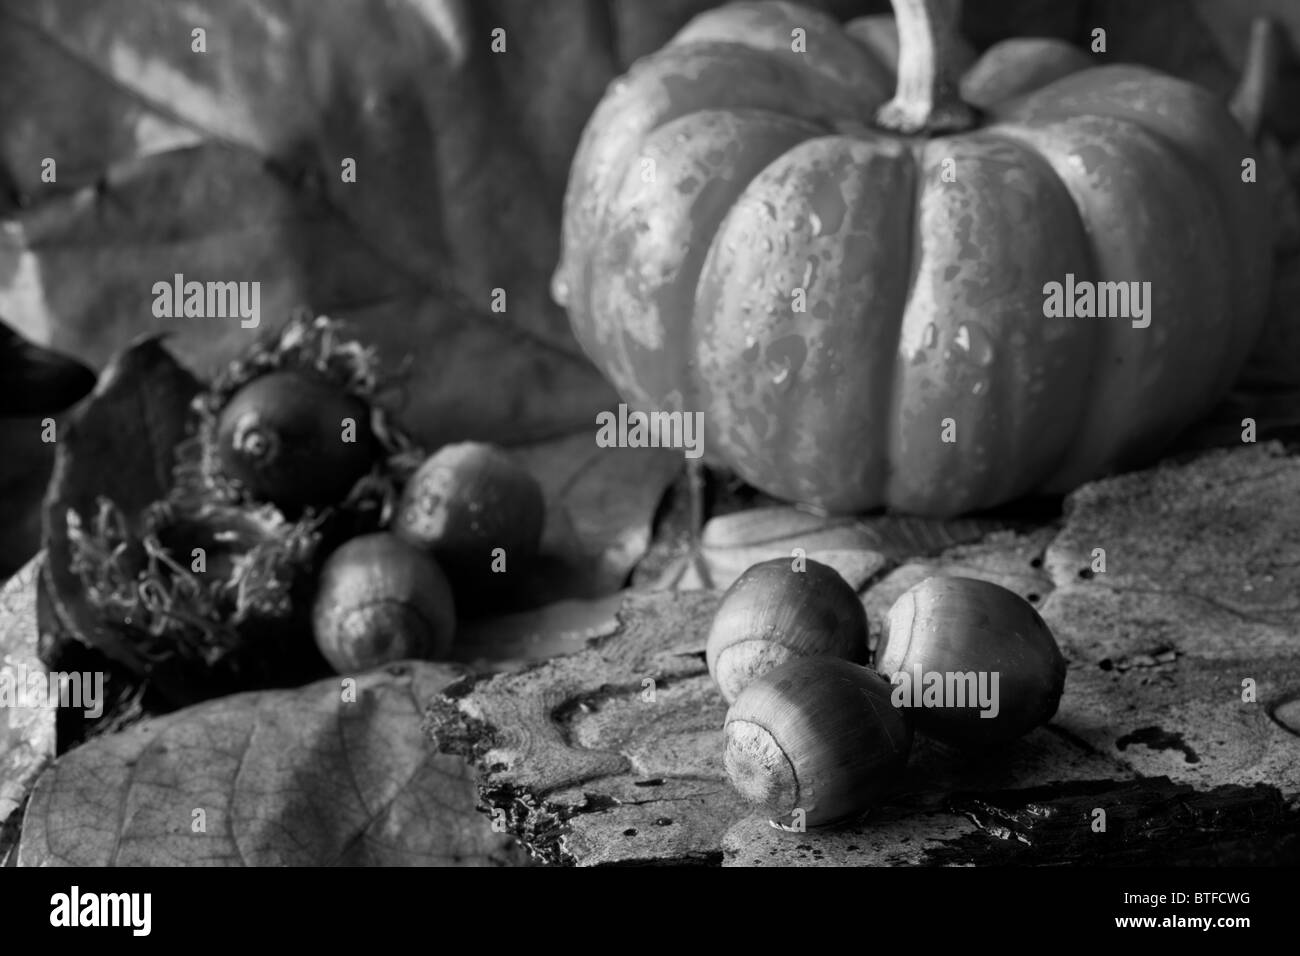 Still life with pumpkins and acorns Stock Photo